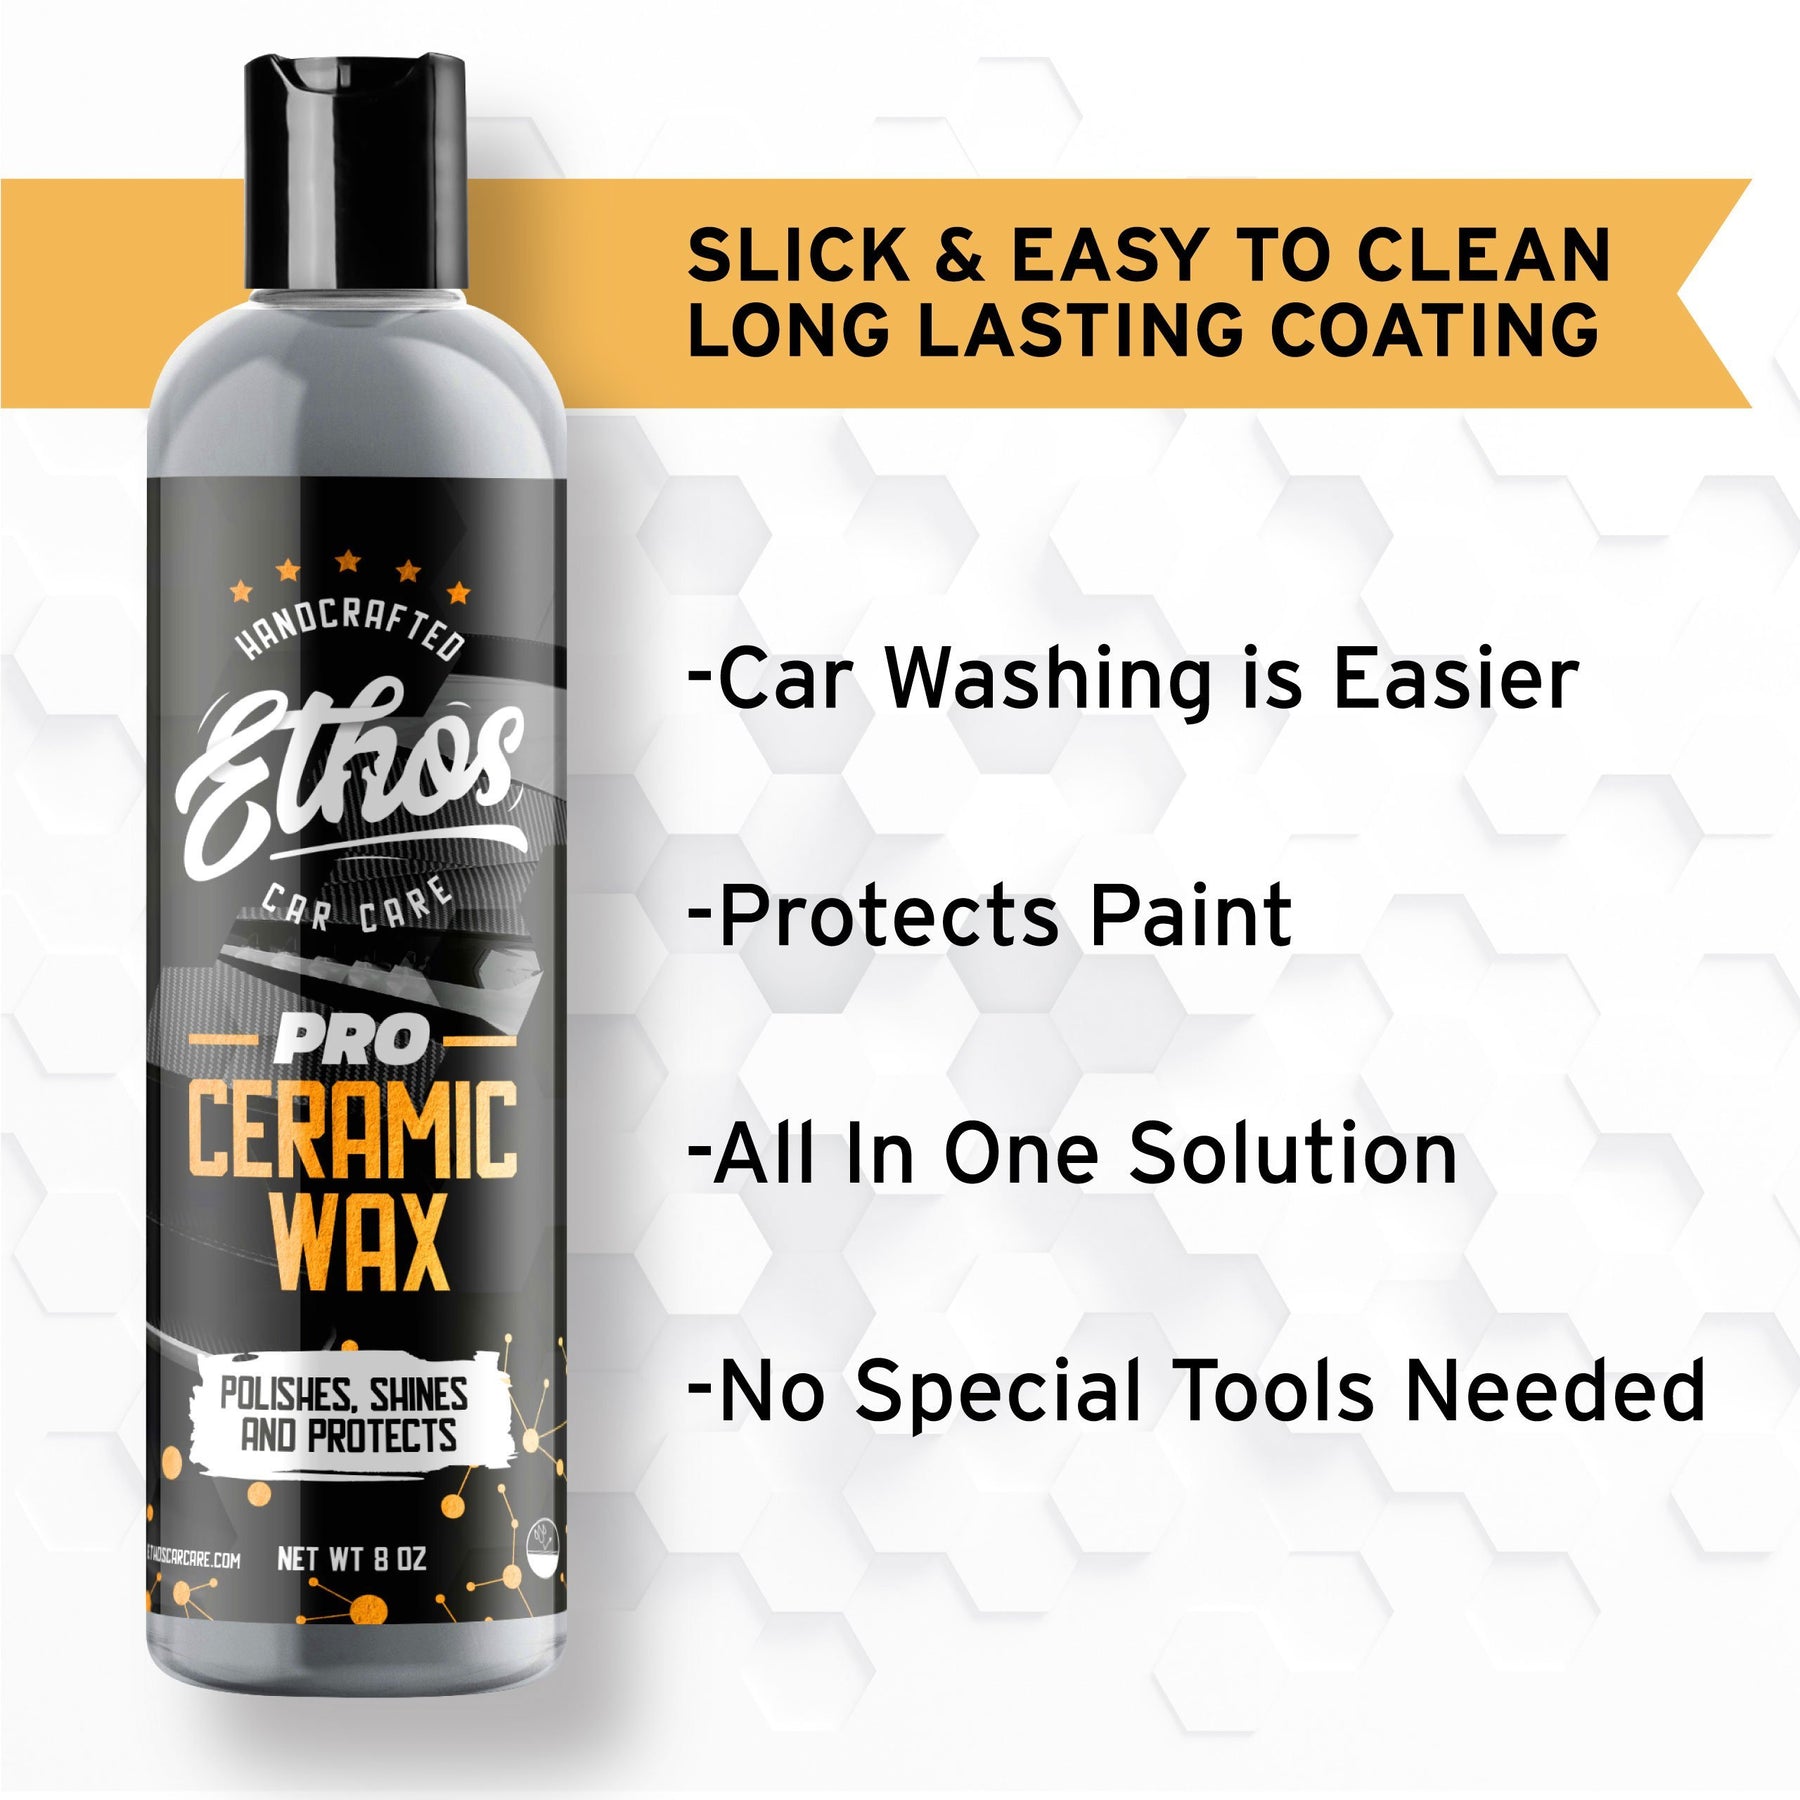 Ethos Car Care on Instagram: Sometimes the simplest answer is the best.  Defy quickly cleans, conditions, & coats your paint with ceramic-infused  protectants. It's hard not to choose Defy when you're looking